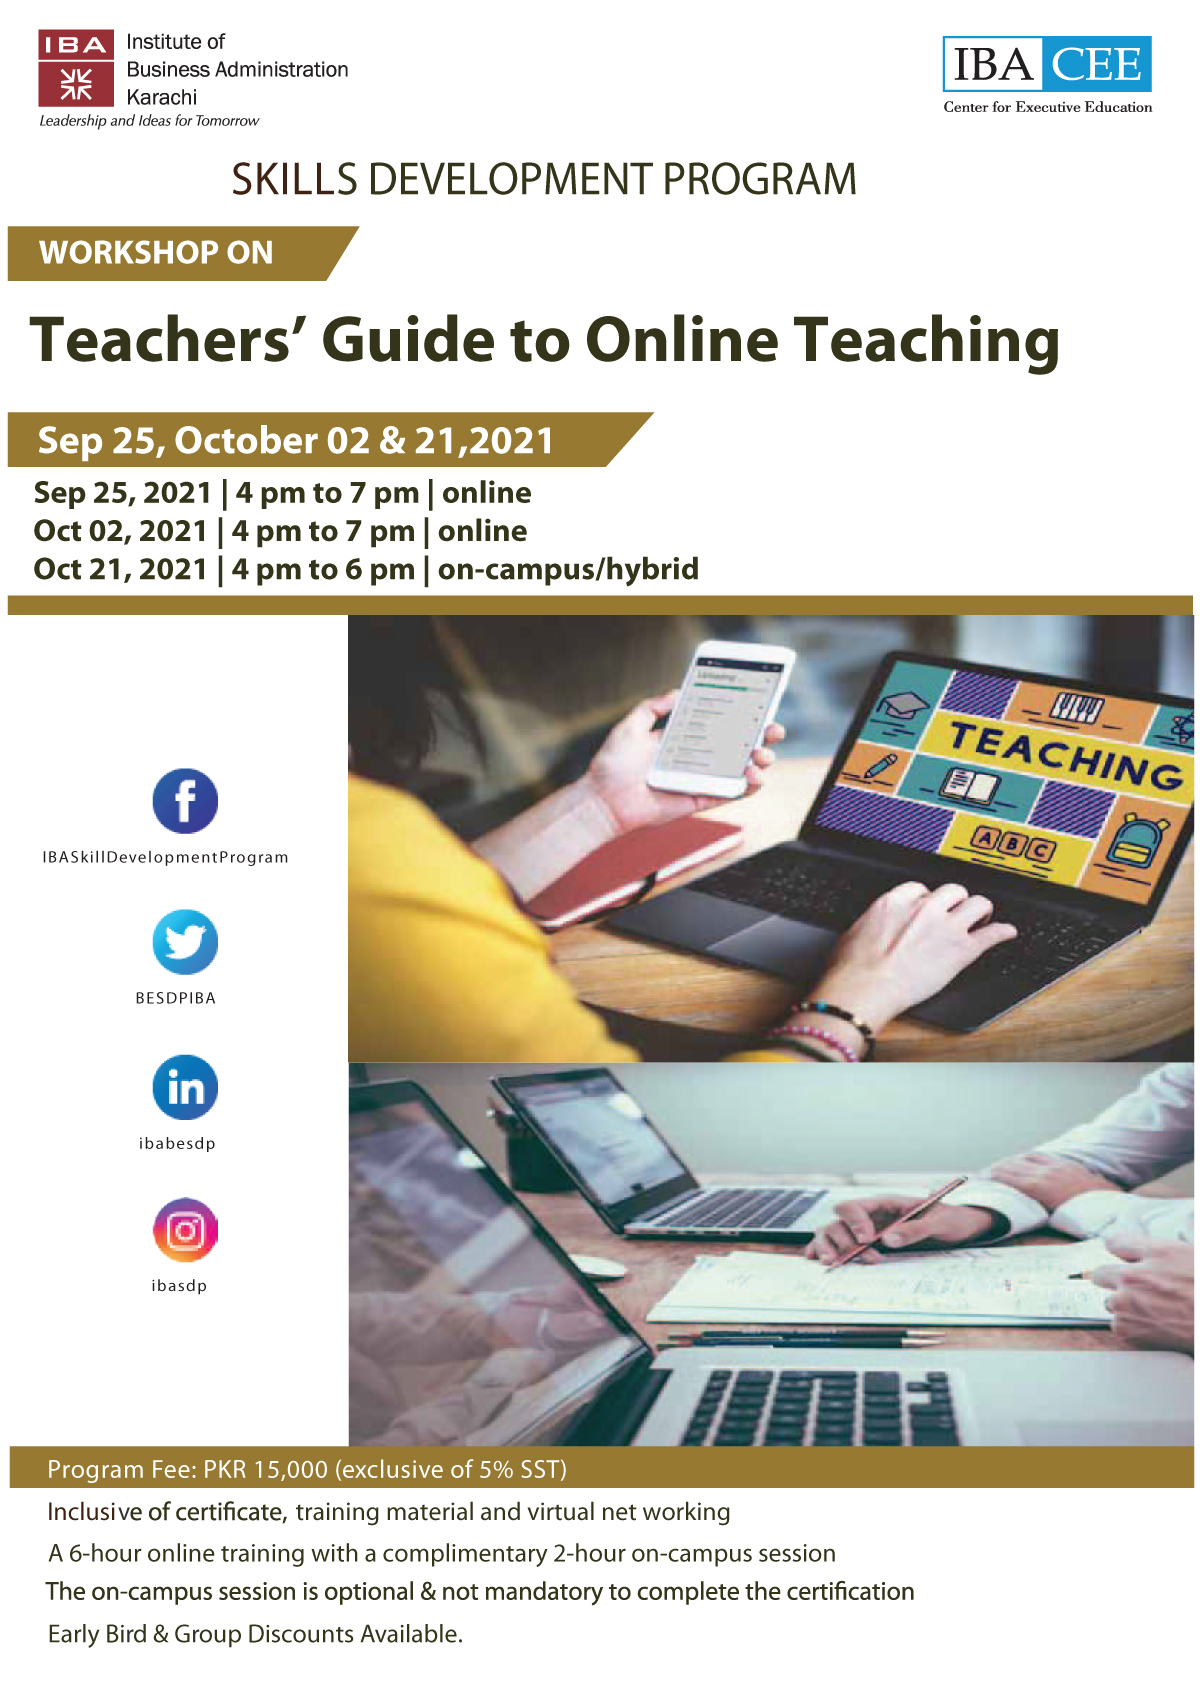 The teachers’ guide to online teaching